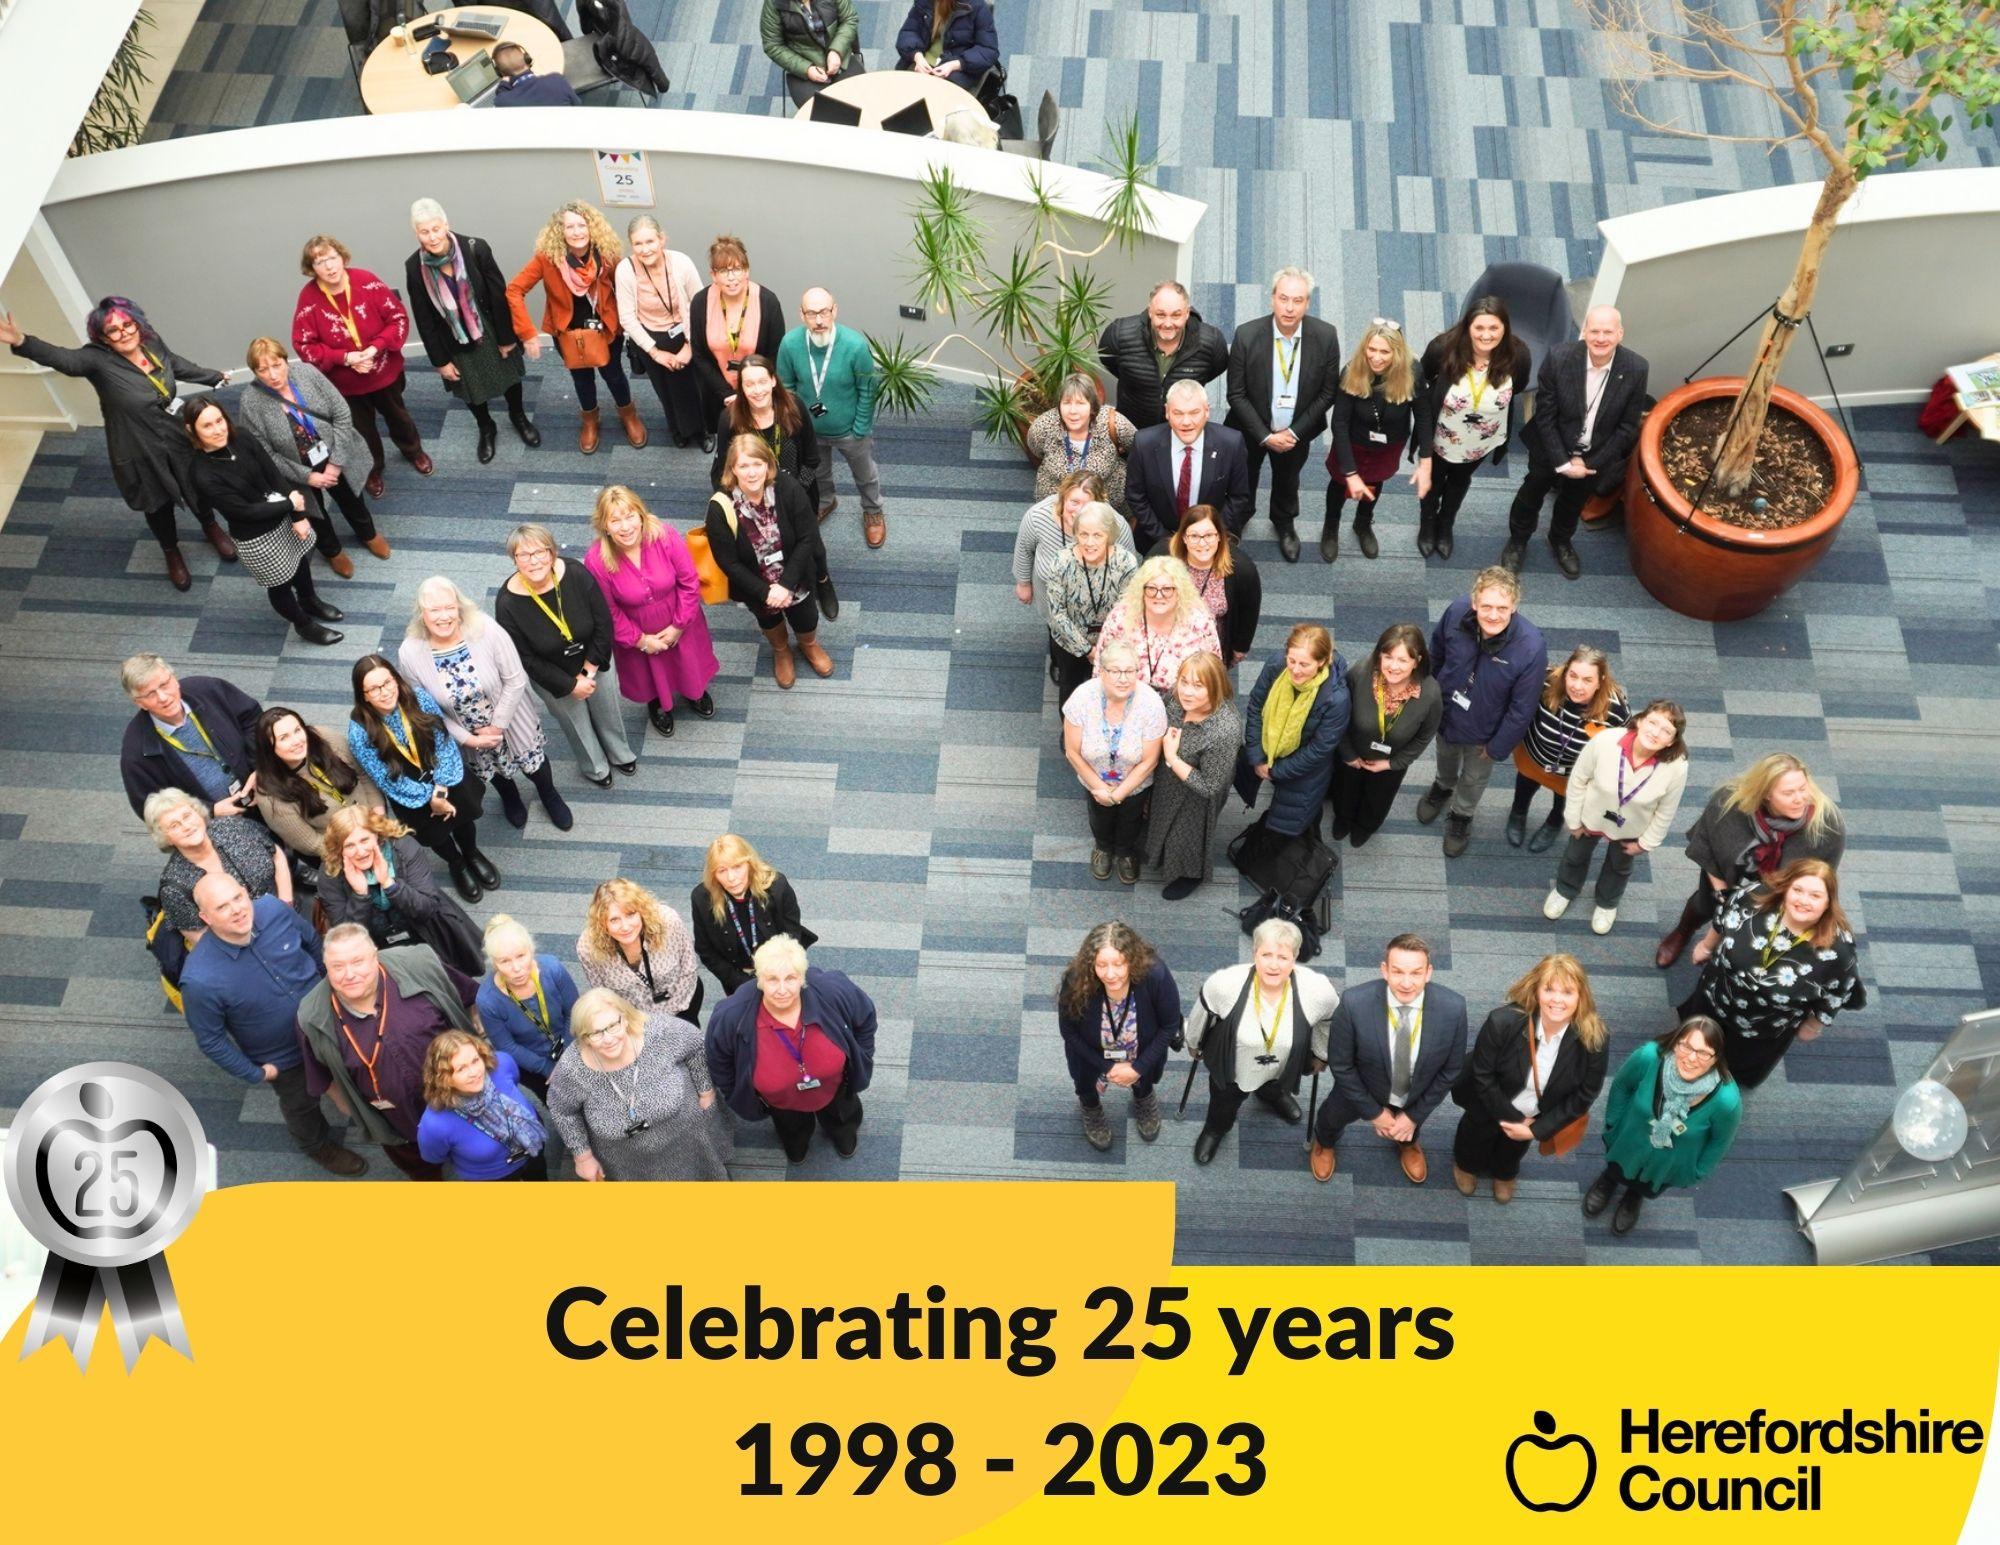 Council celebrates 25 years of serving residents, businesses and communities across Herefordshire